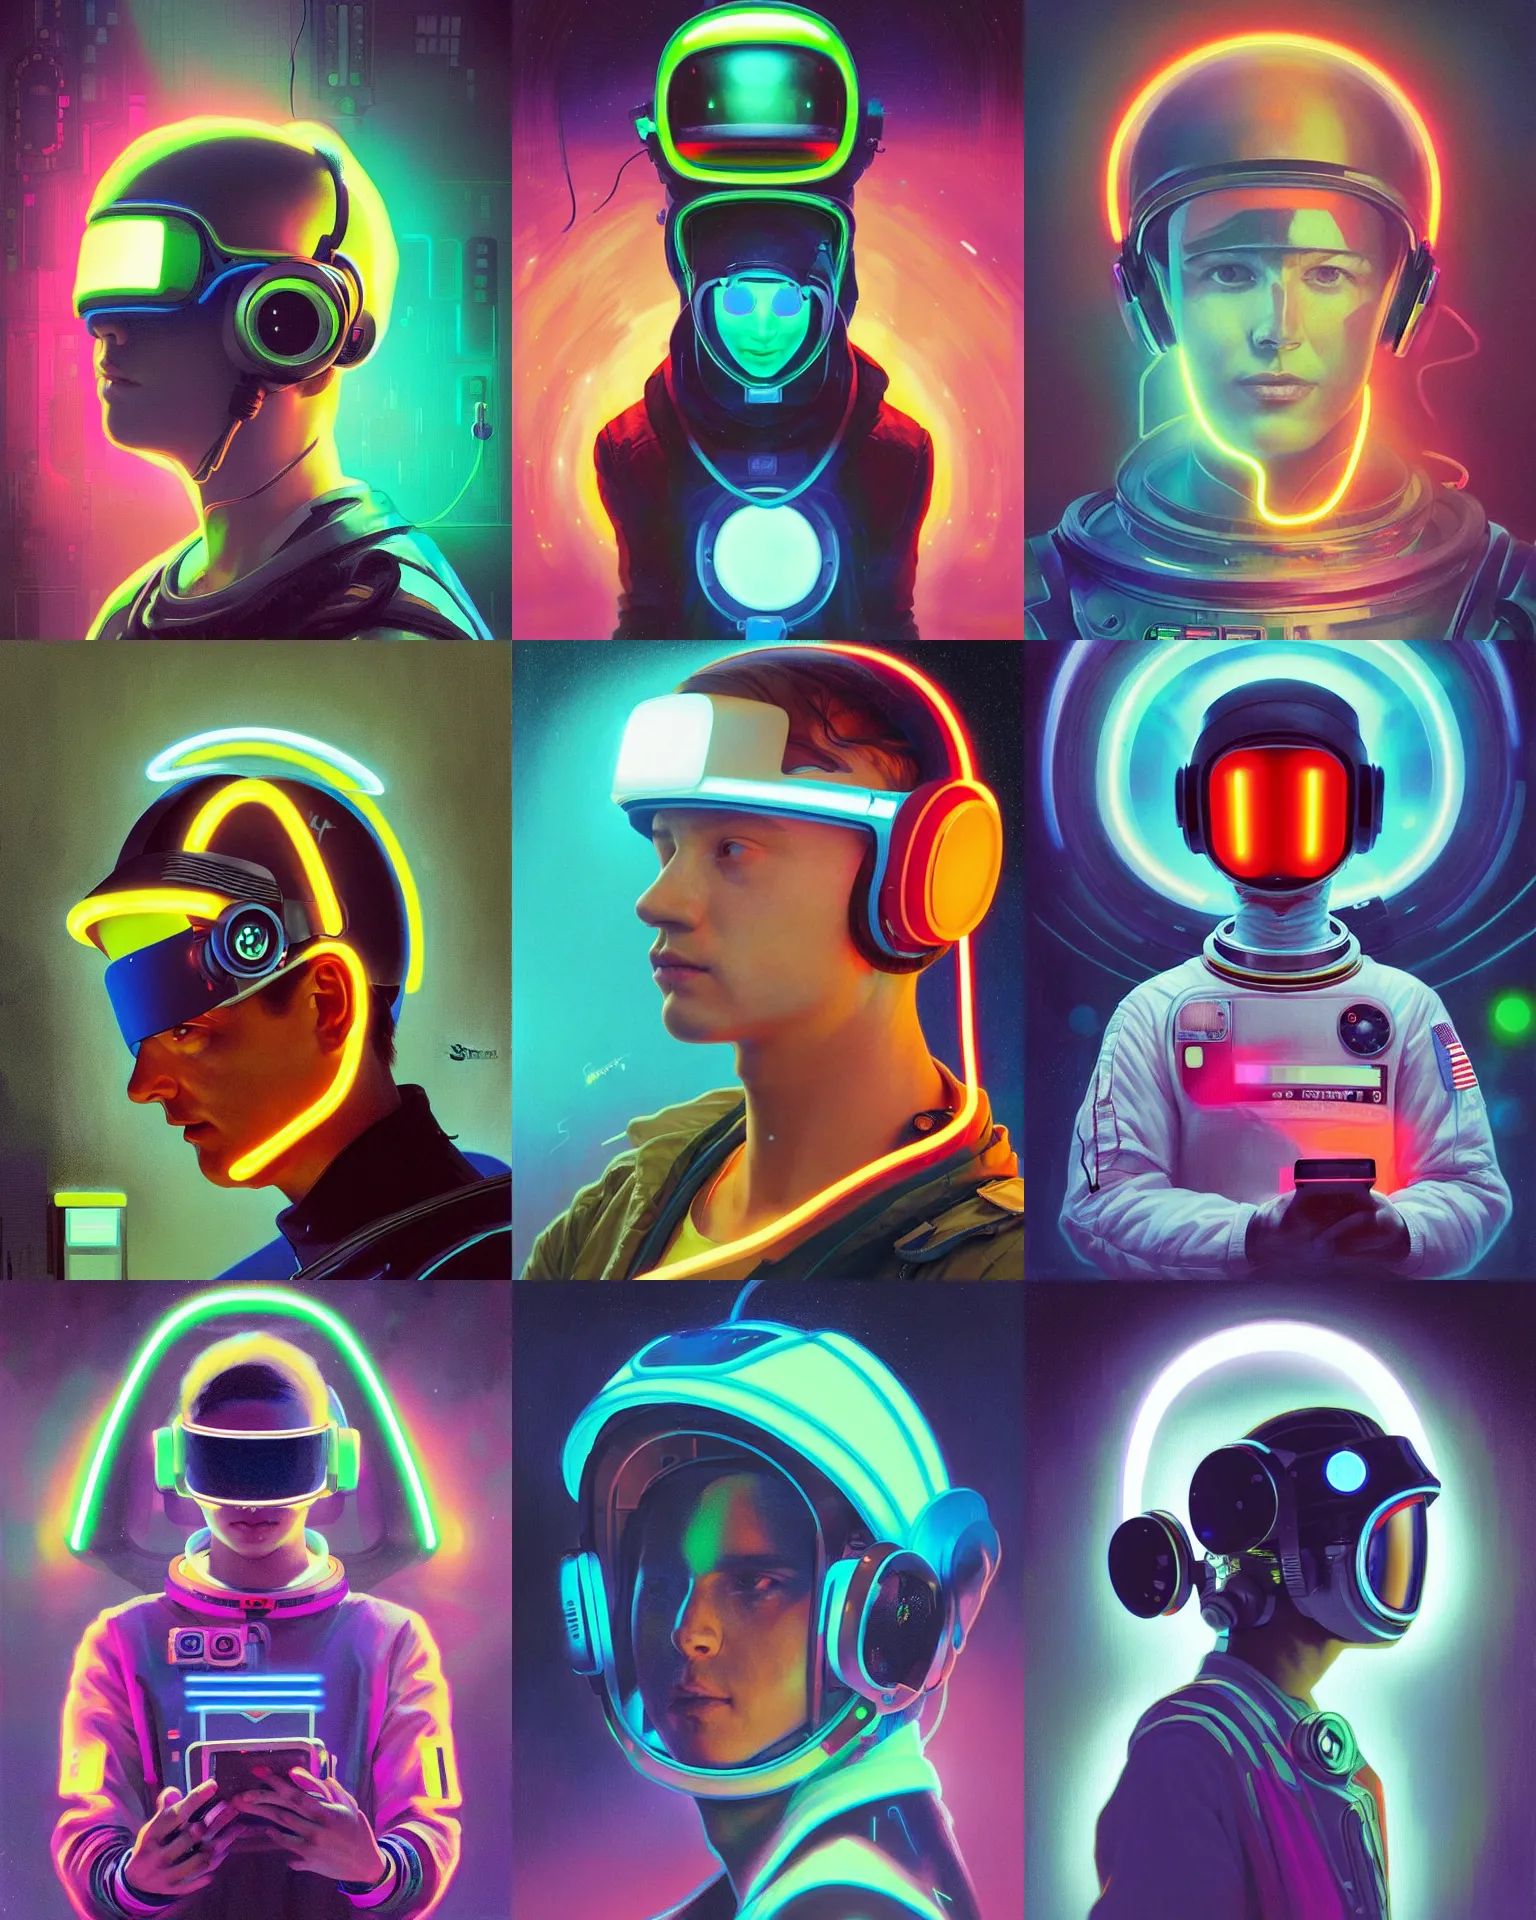 Prompt: future coder looking on, glowing visor over eyes and sleek neon headphones, neon accents, backlit, desaturated headshot portrait painting by dean cornwall, ilya repin, rhads, tom whalen, alex grey, alphonse mucha, donoto giancola, astronaut cyberpunk electric fashion photography